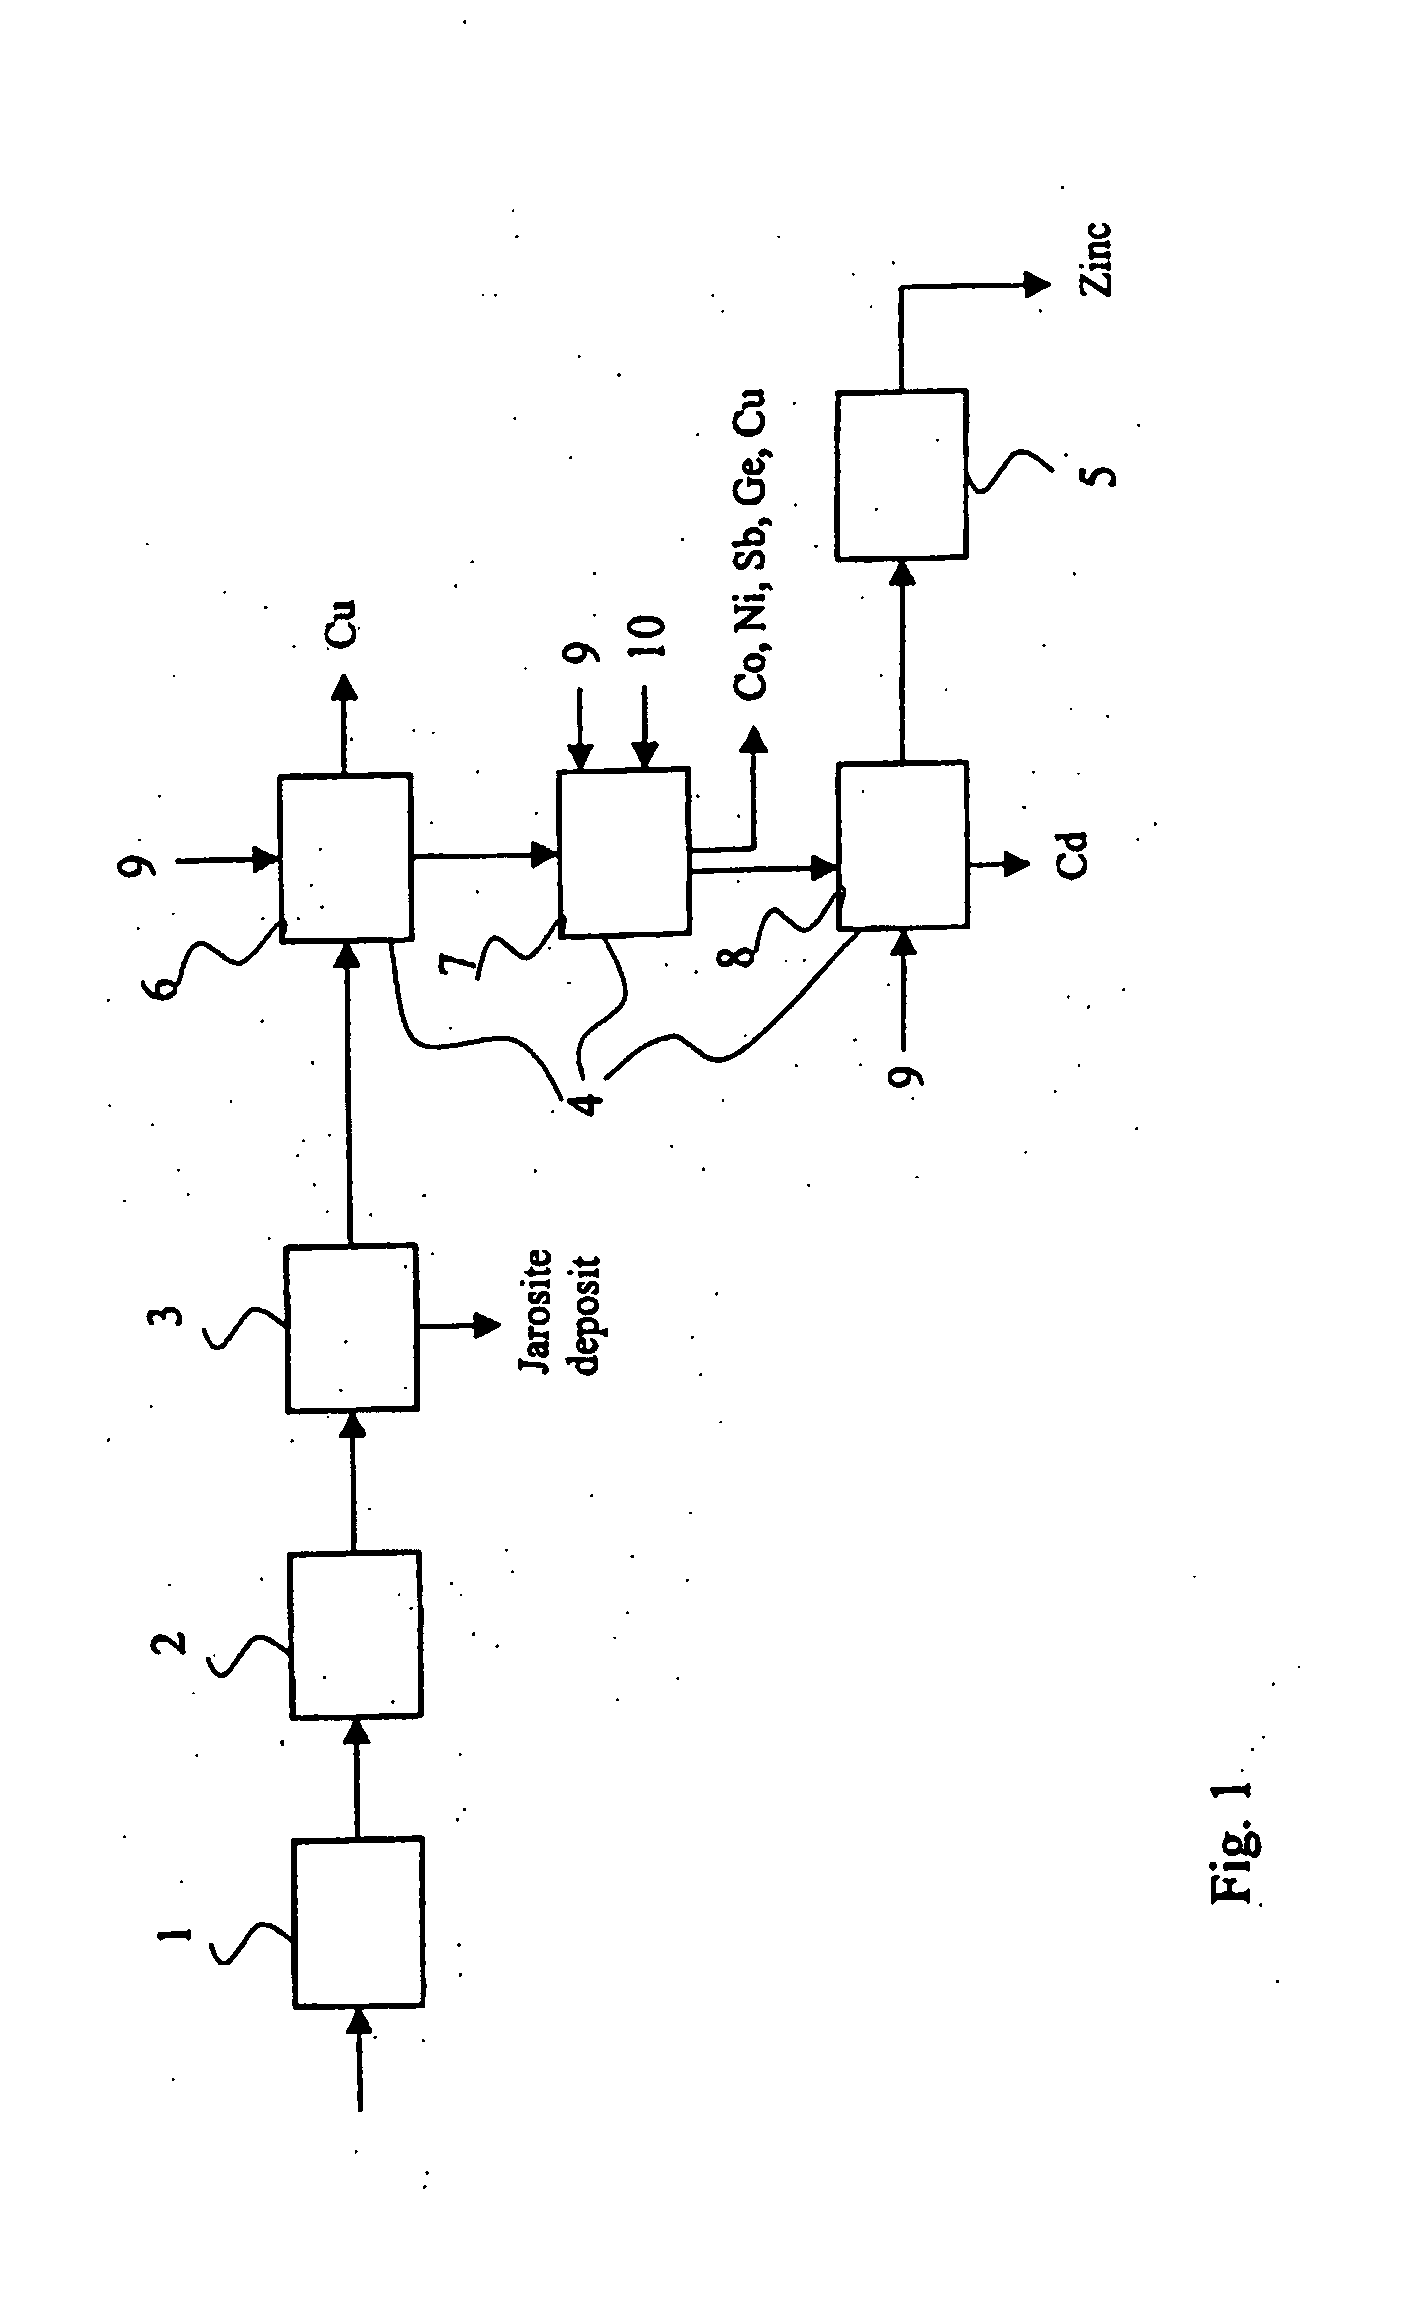 Method and Apparatus for Controlling Metal Separation